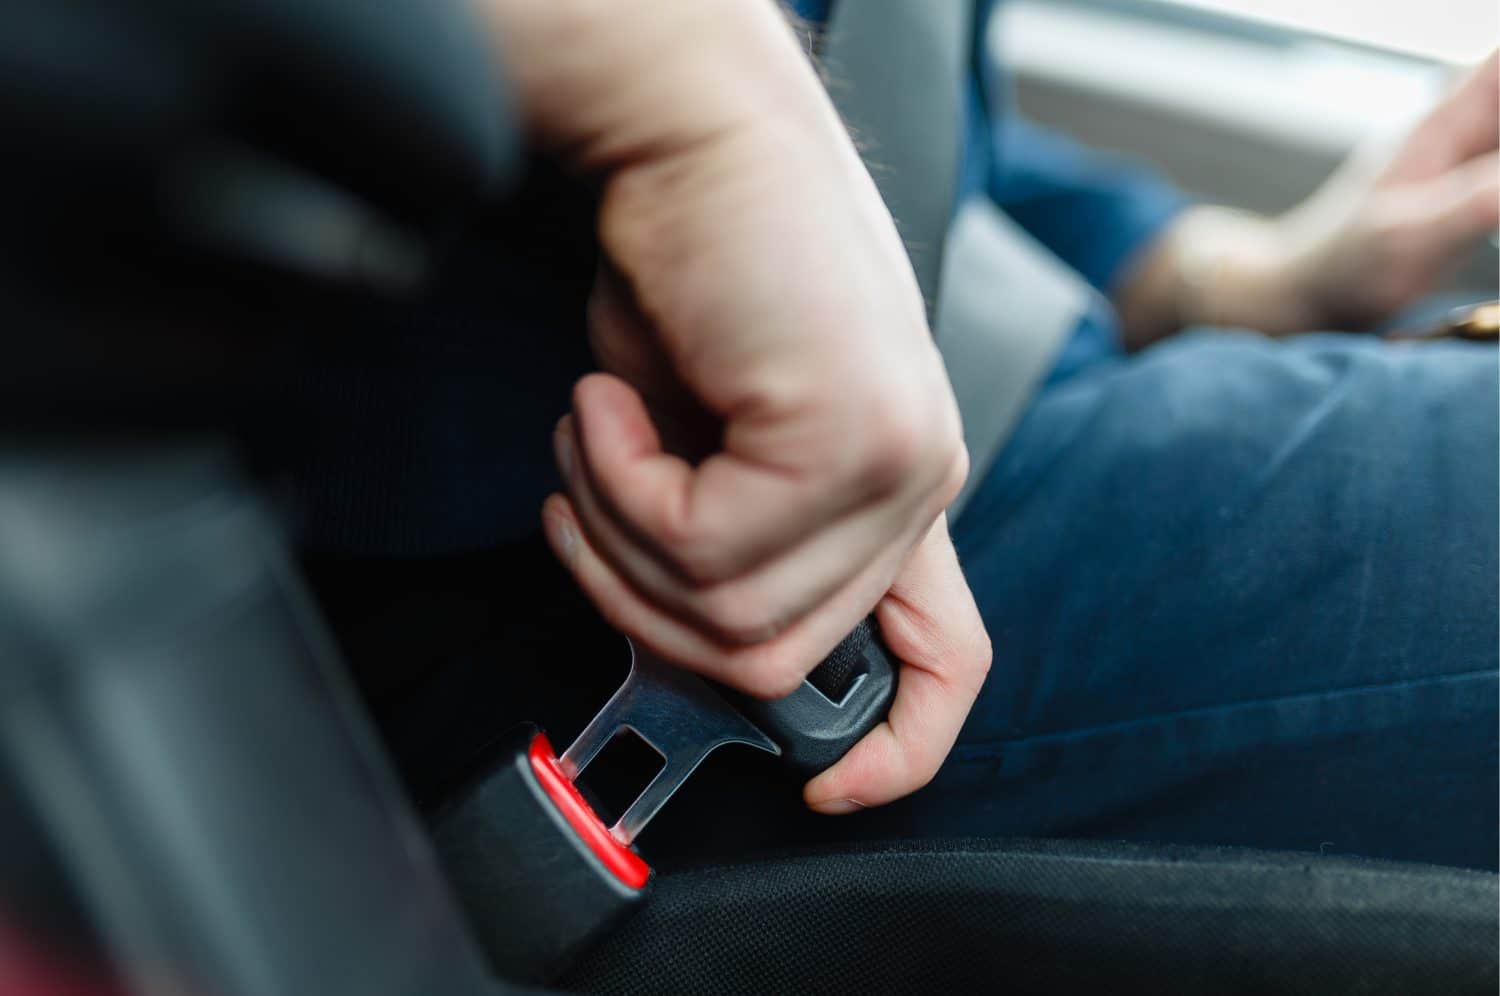 I Wasn’t Wearing a Seat Belt During a Crash. Now What?